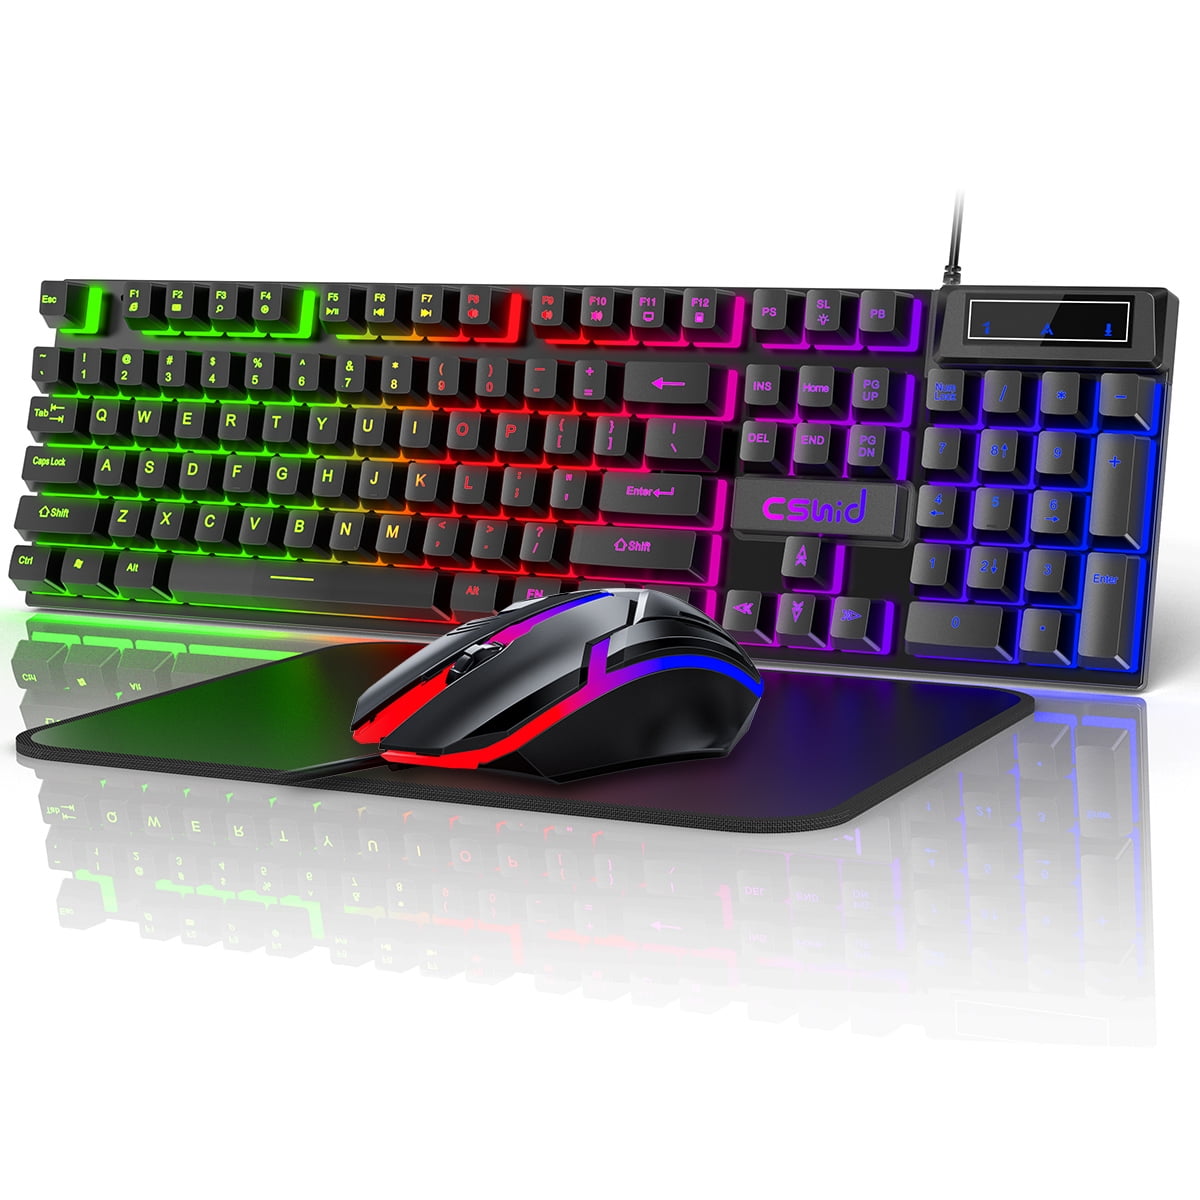 Wired Gaming Keyboard & Mouse Combo, RGB Backlit Mechanical Feel Gaming Keyboard Mouse W/ Multimedia Keys, Anti-ghosting Keys, Spill-Resistant Keycaps for Windows PC Gamers Desktop Computer Laptop - image 1 of 7